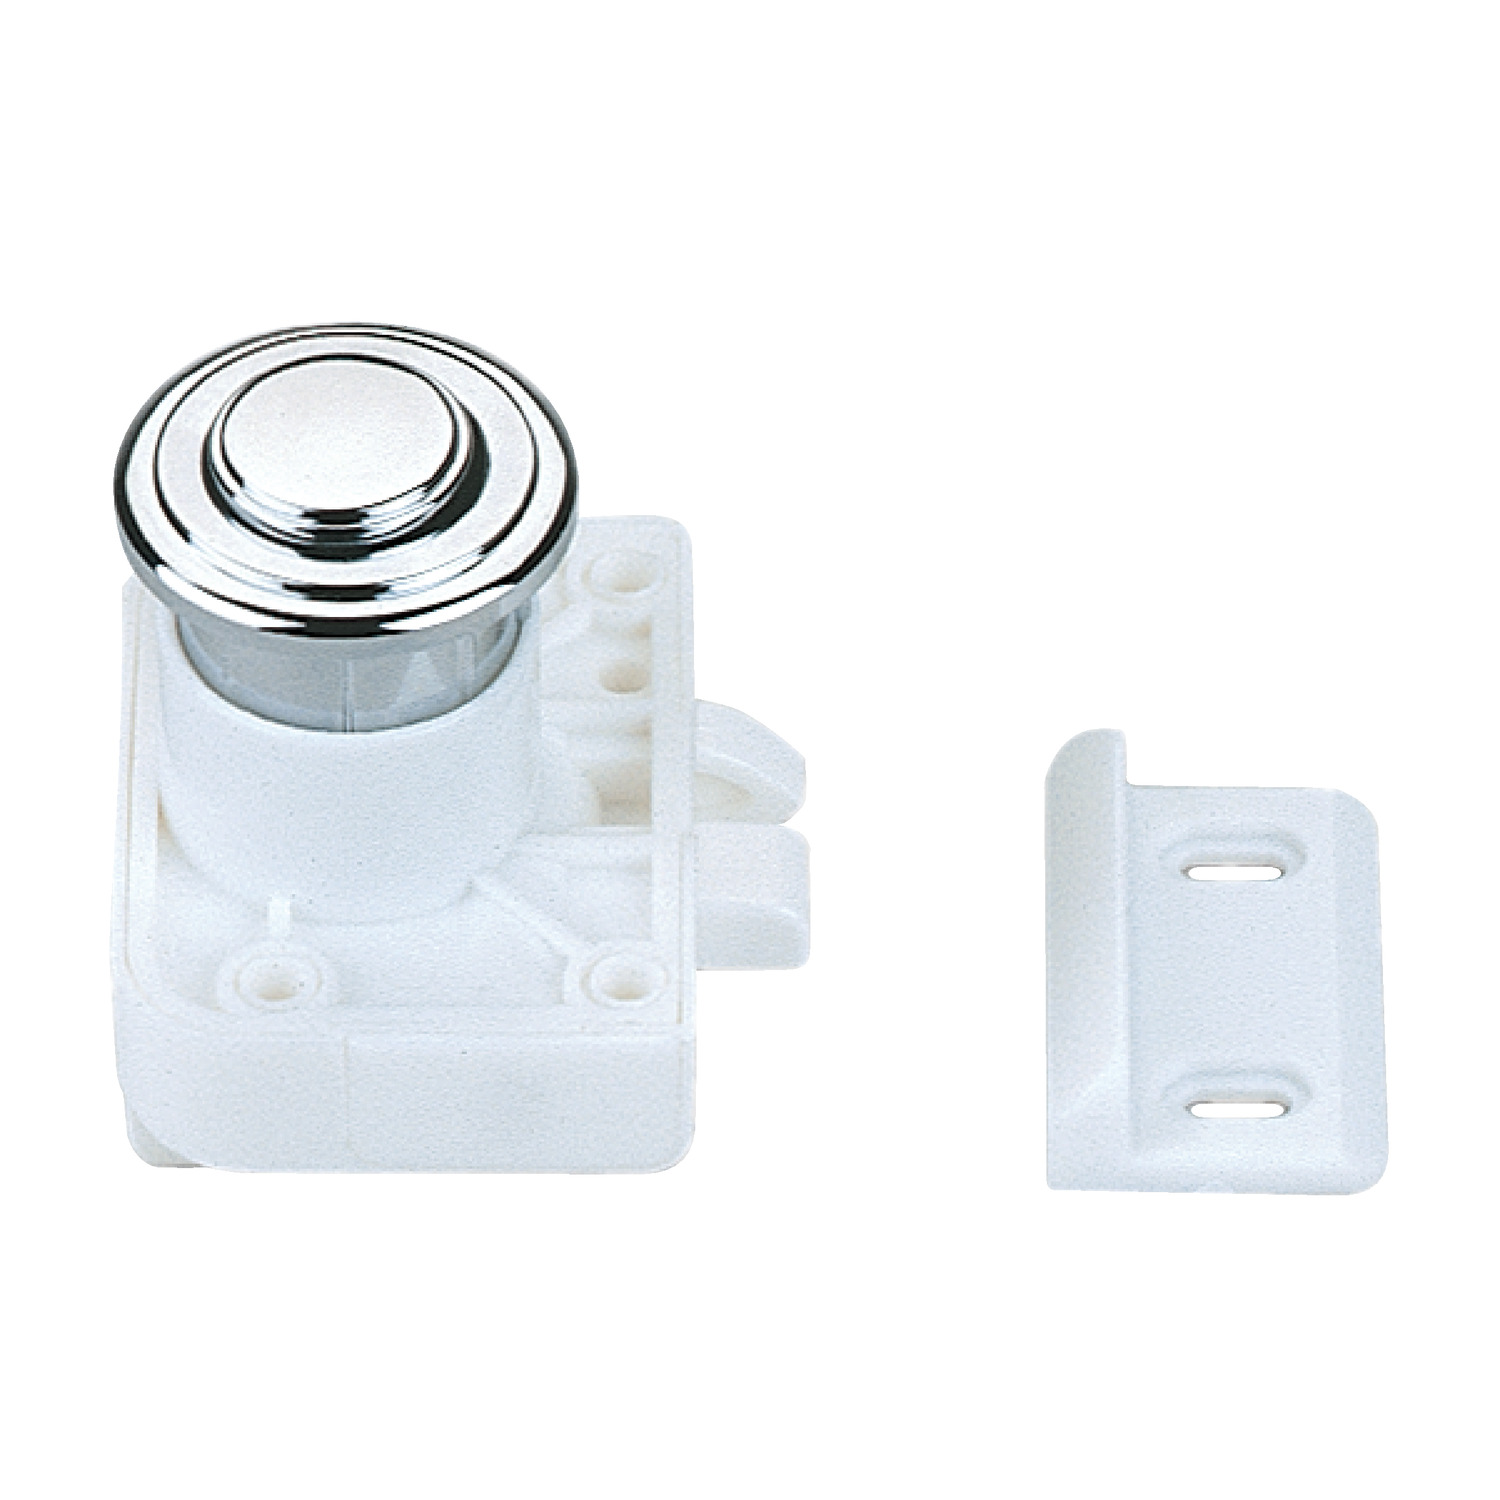 Push Knobs Push button latch, available in chrome, satin nickel or polished brass plating. Polyamide body.